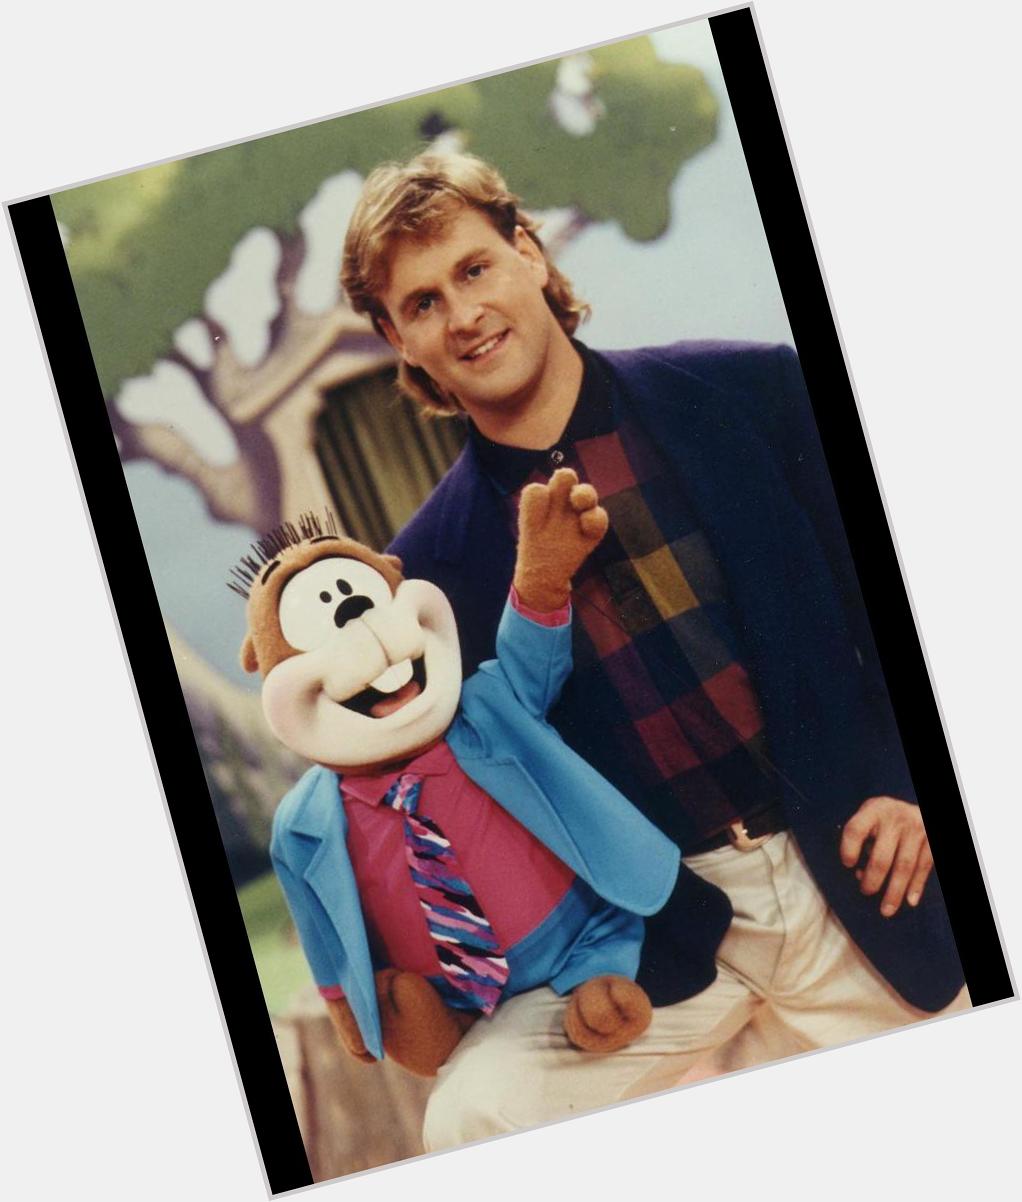 Happy 56th Birthday Dave Coulier!! 